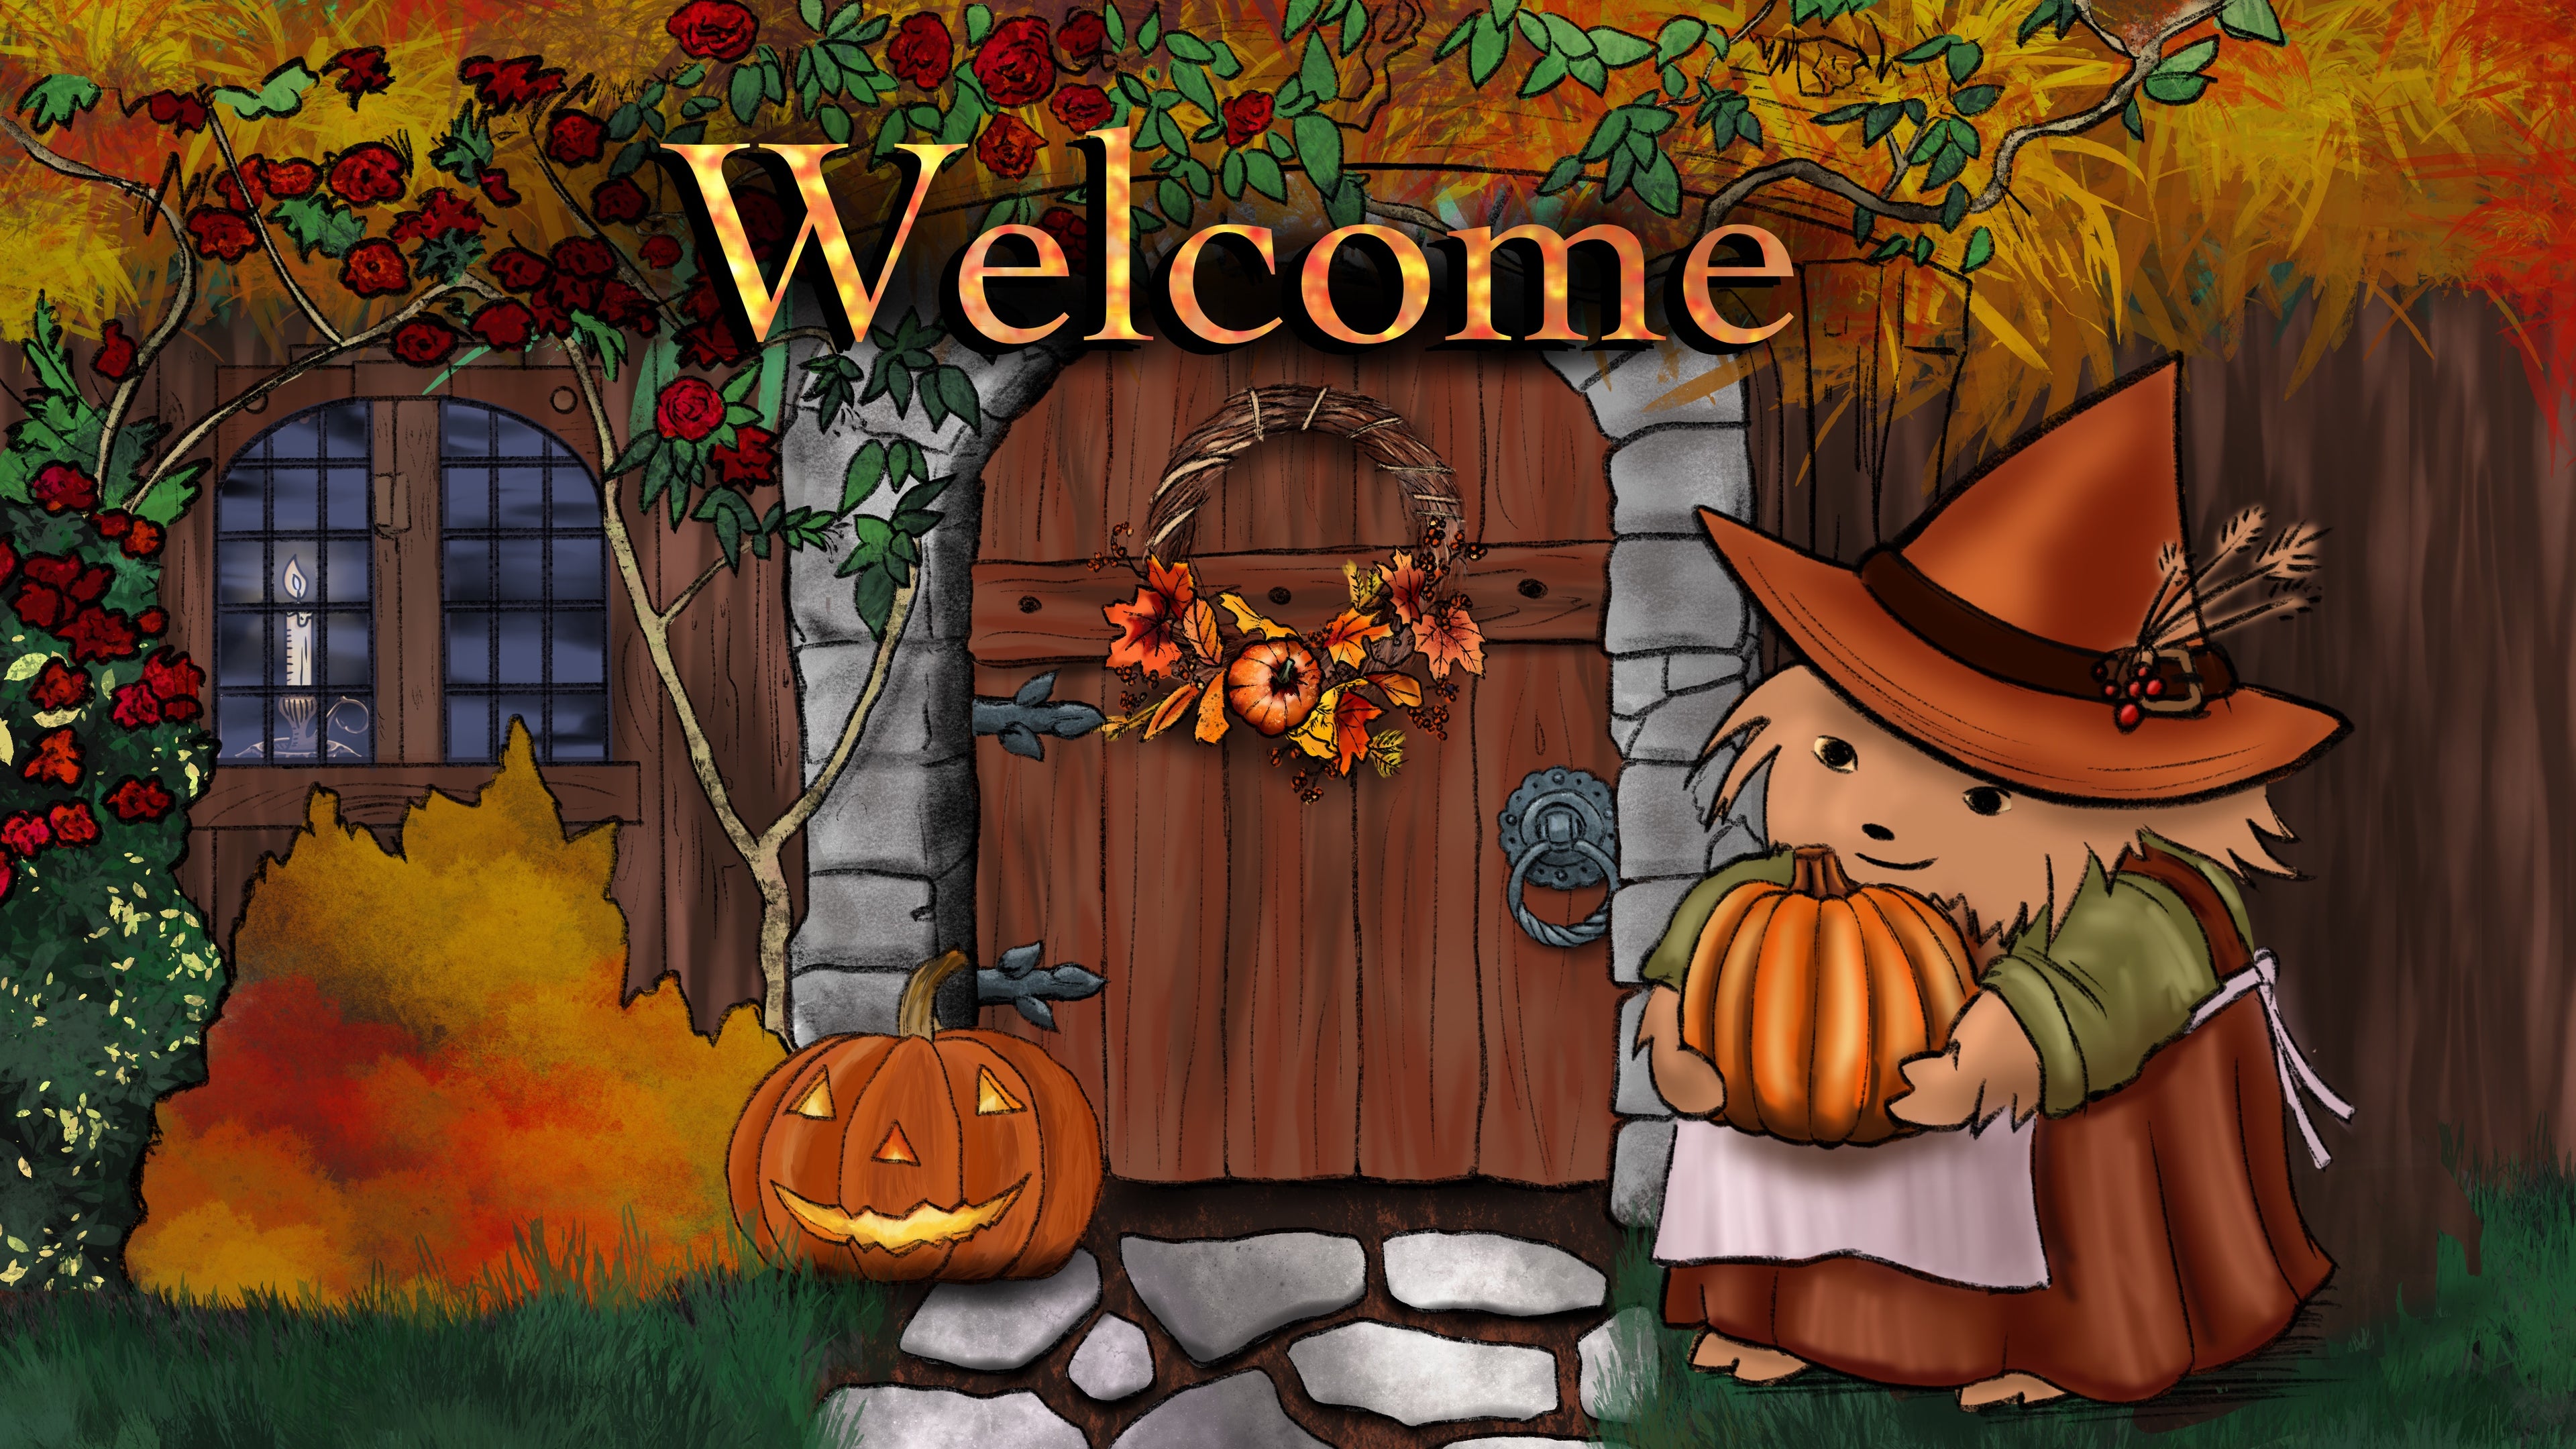 Welcome sign over the apothecary. The hedgehog hedge witch wears an autumn hat and holds a pumpkin. Colorful leaves surround her home.